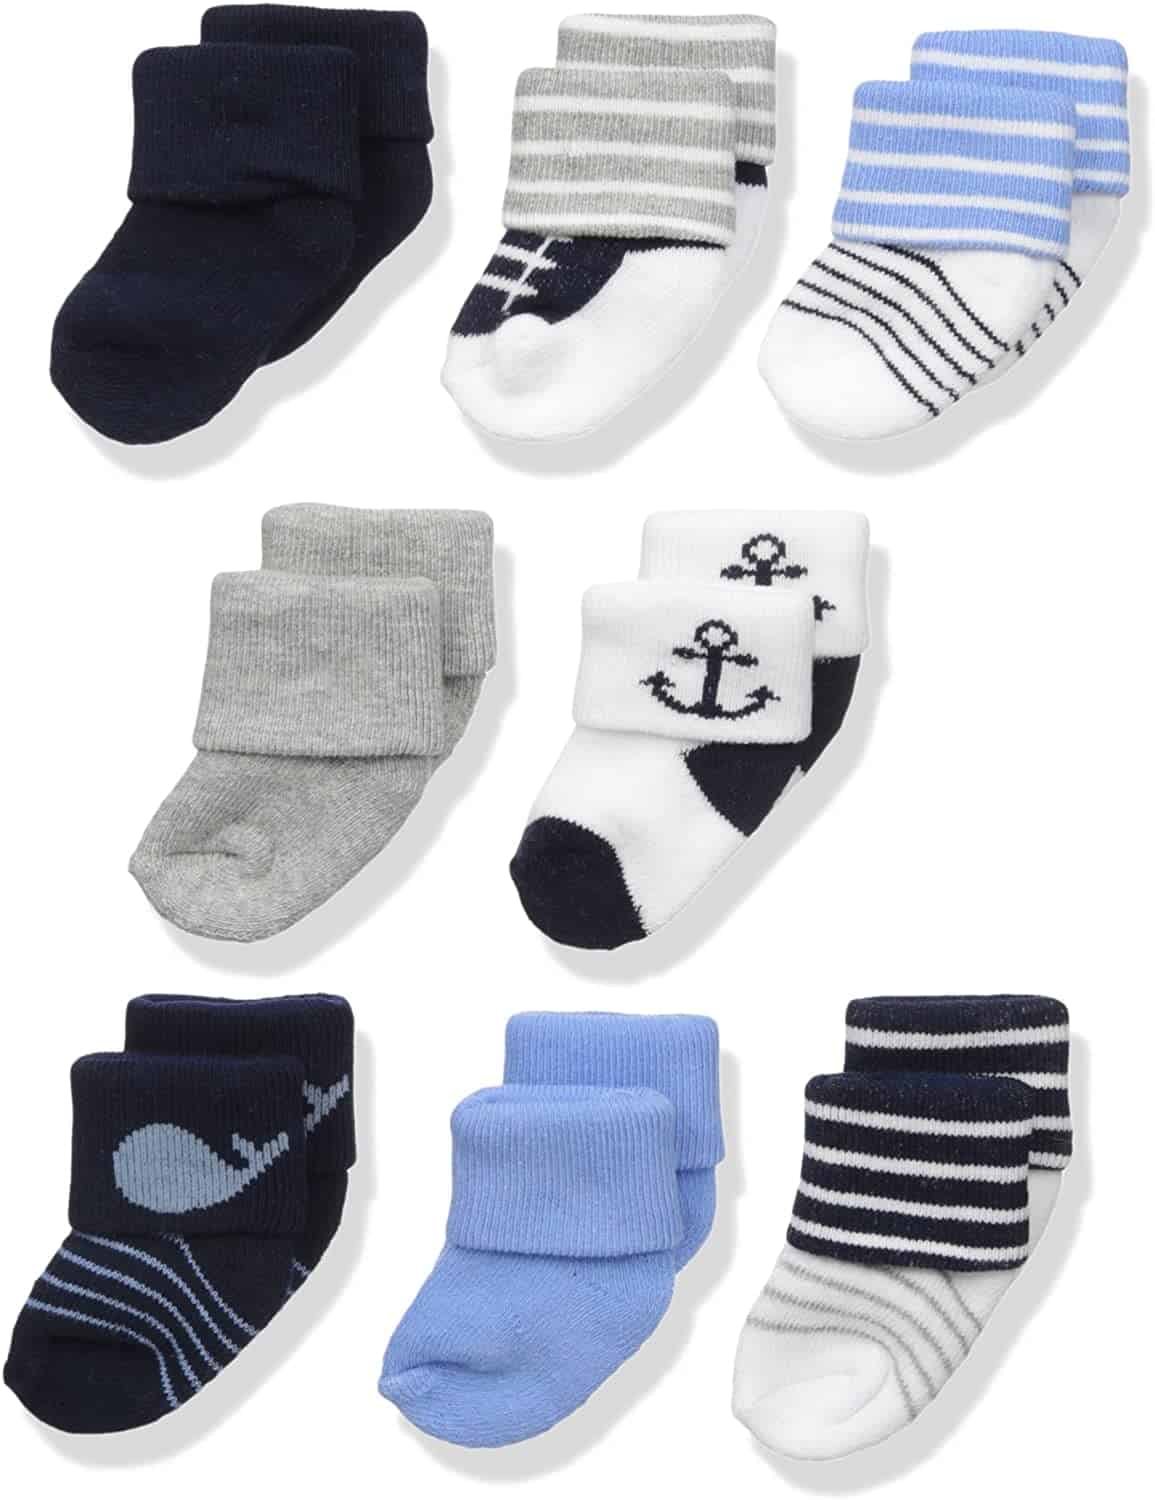 8 pairs of sock for baby with different colors - baby boy gifts